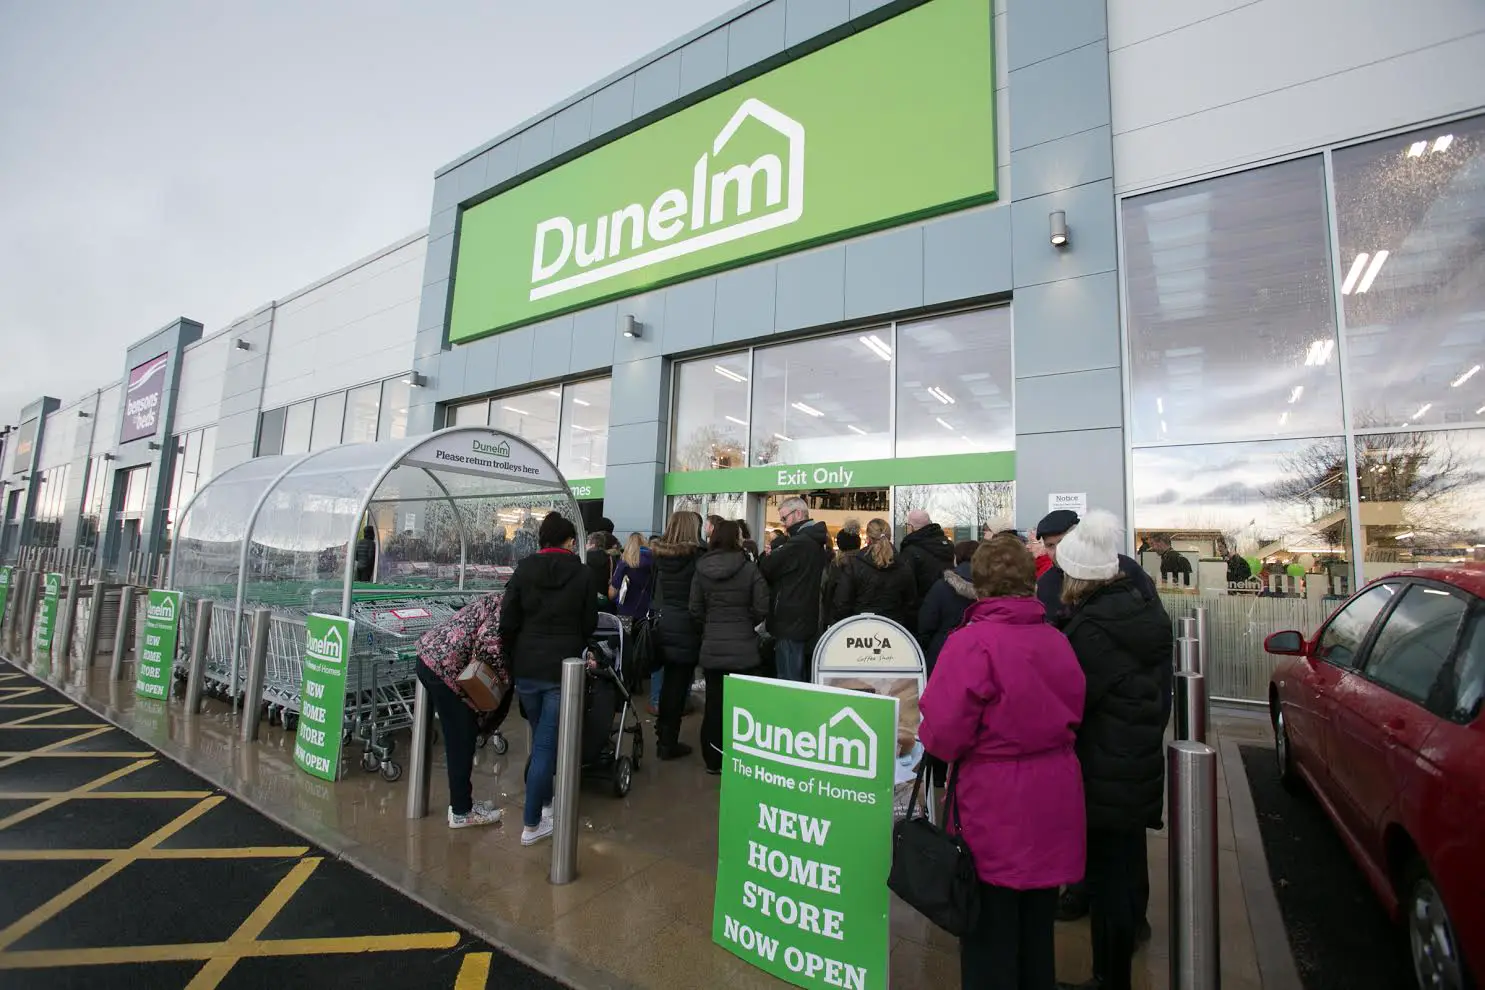 Shoppers file into the new Dunelm store this morning